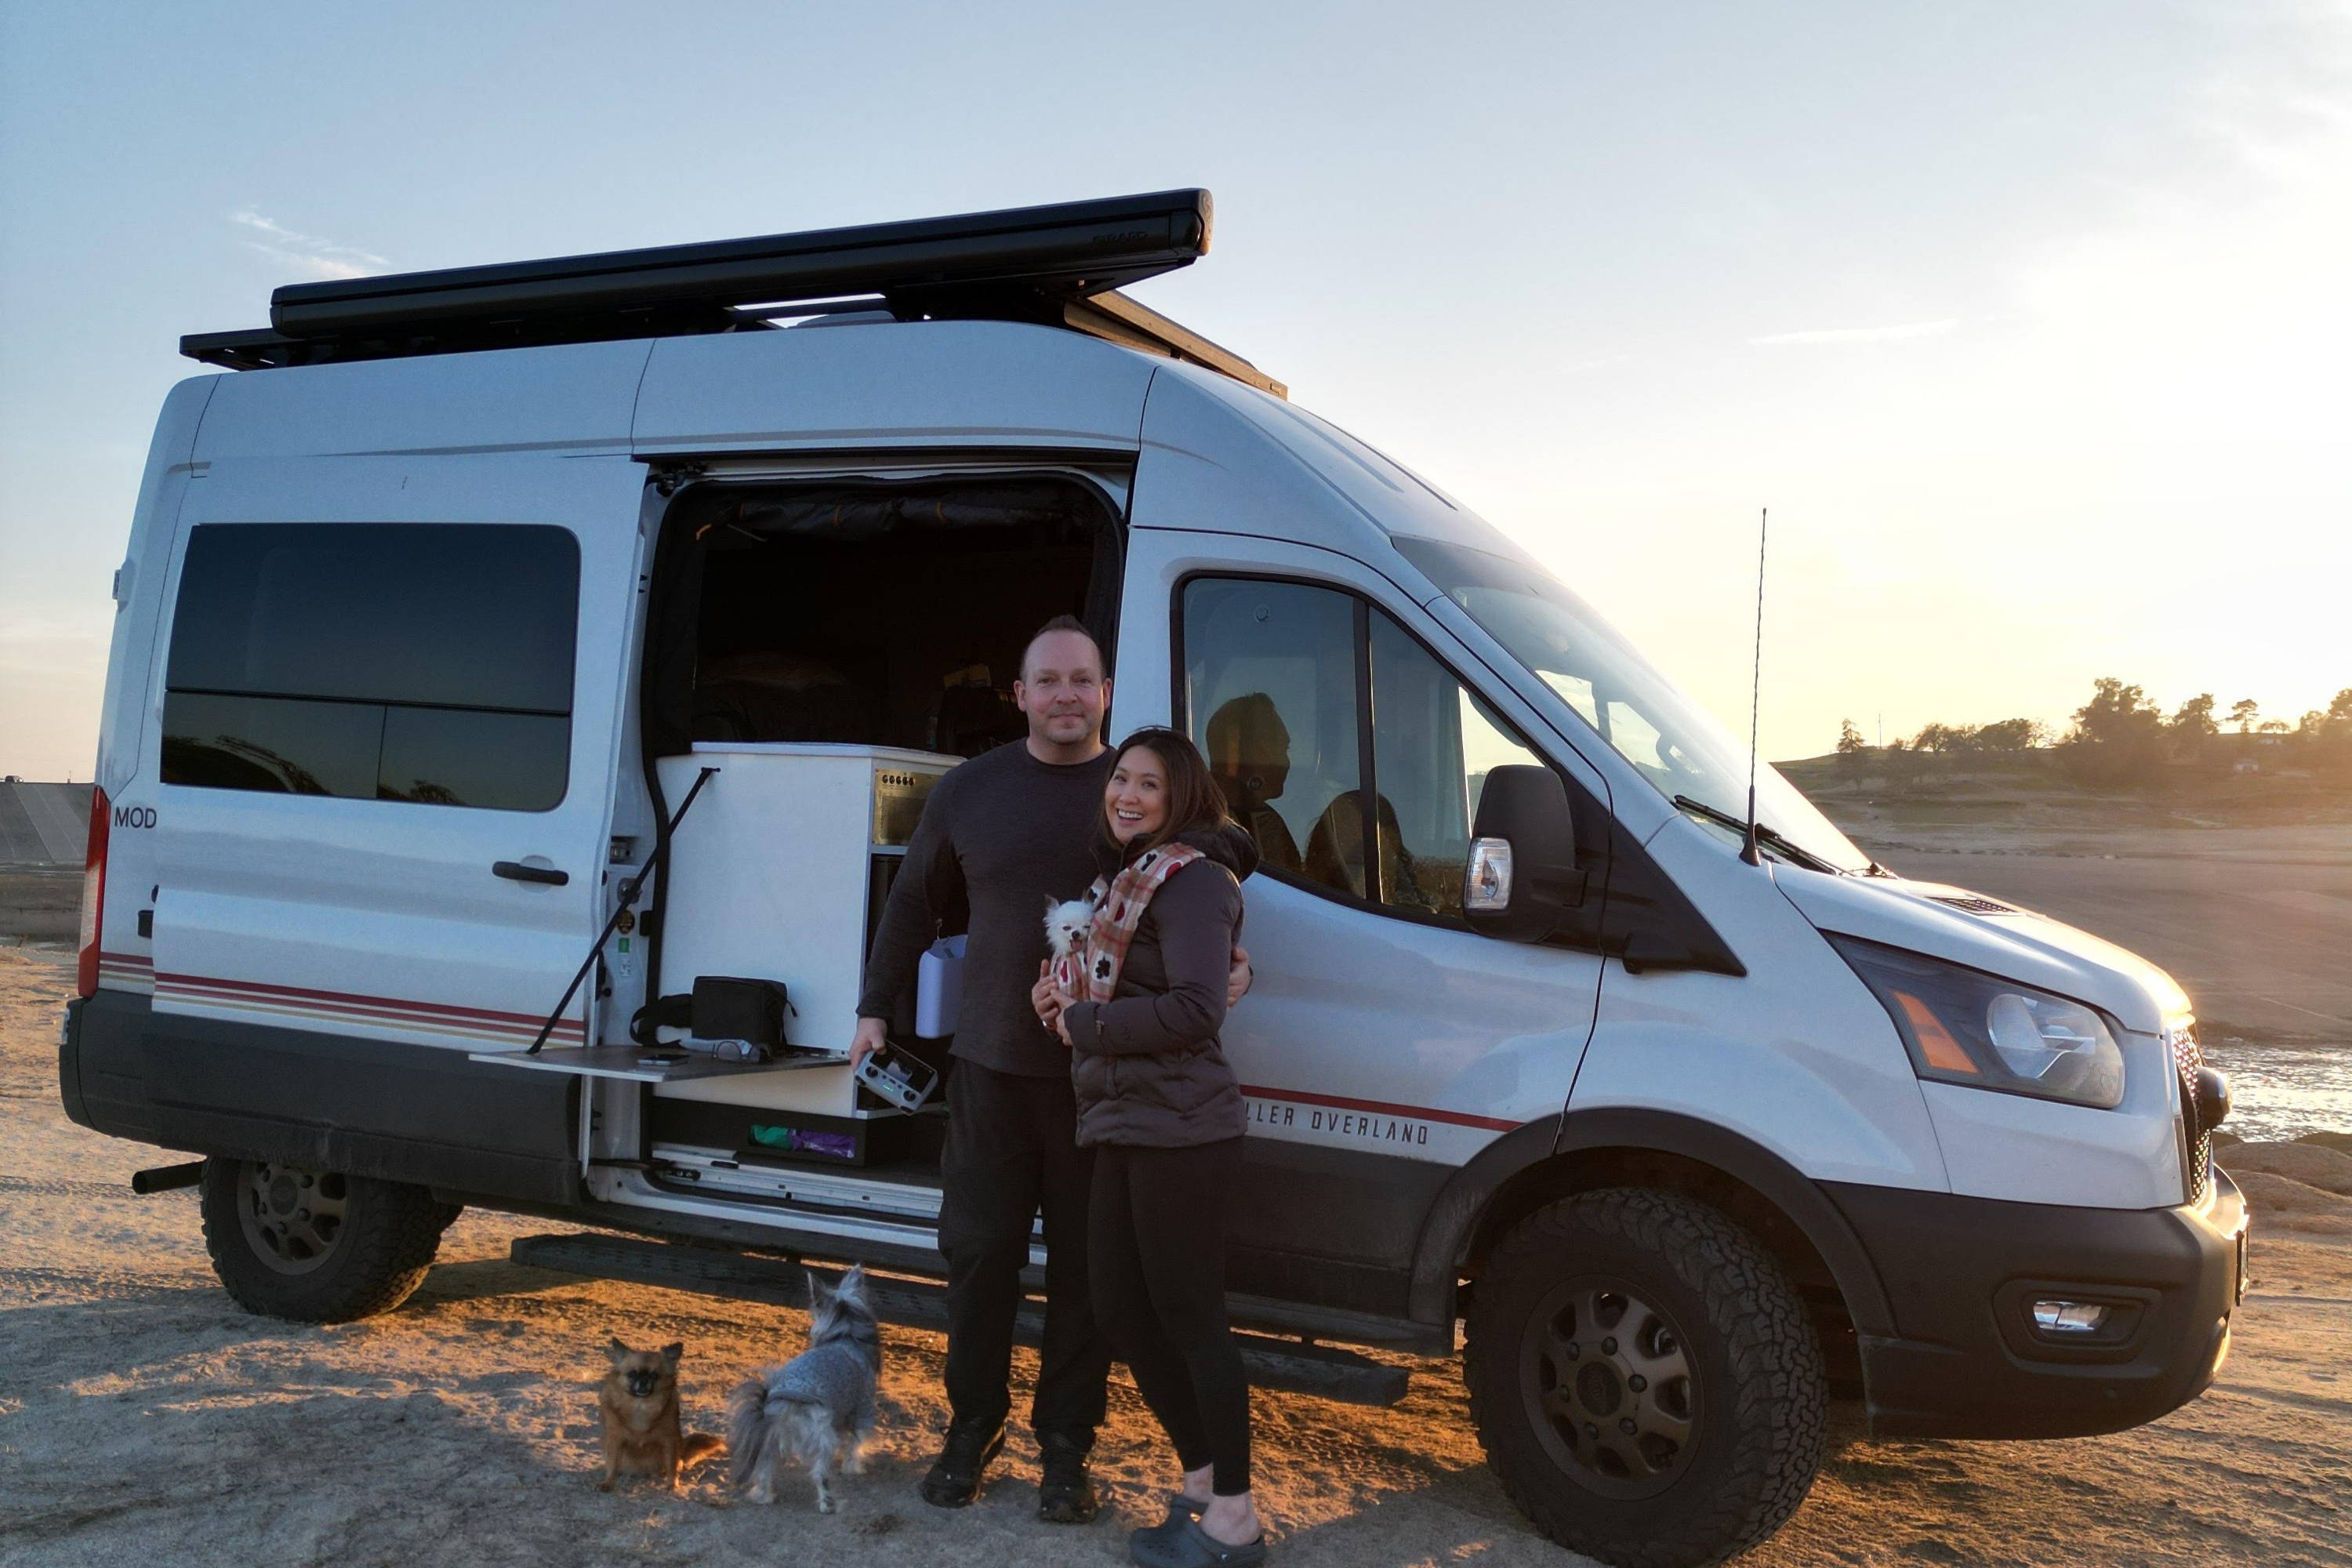 Sean and Pia travel in their Storyteller MODE LT with their four chihuahuas: Yoda, Jabba, Chewbacca and BobaFett. Storyteller vans have all-day heat or air conditioner, making the MODE LT a much more comfortable van for the dogs and for Sean and Pia.